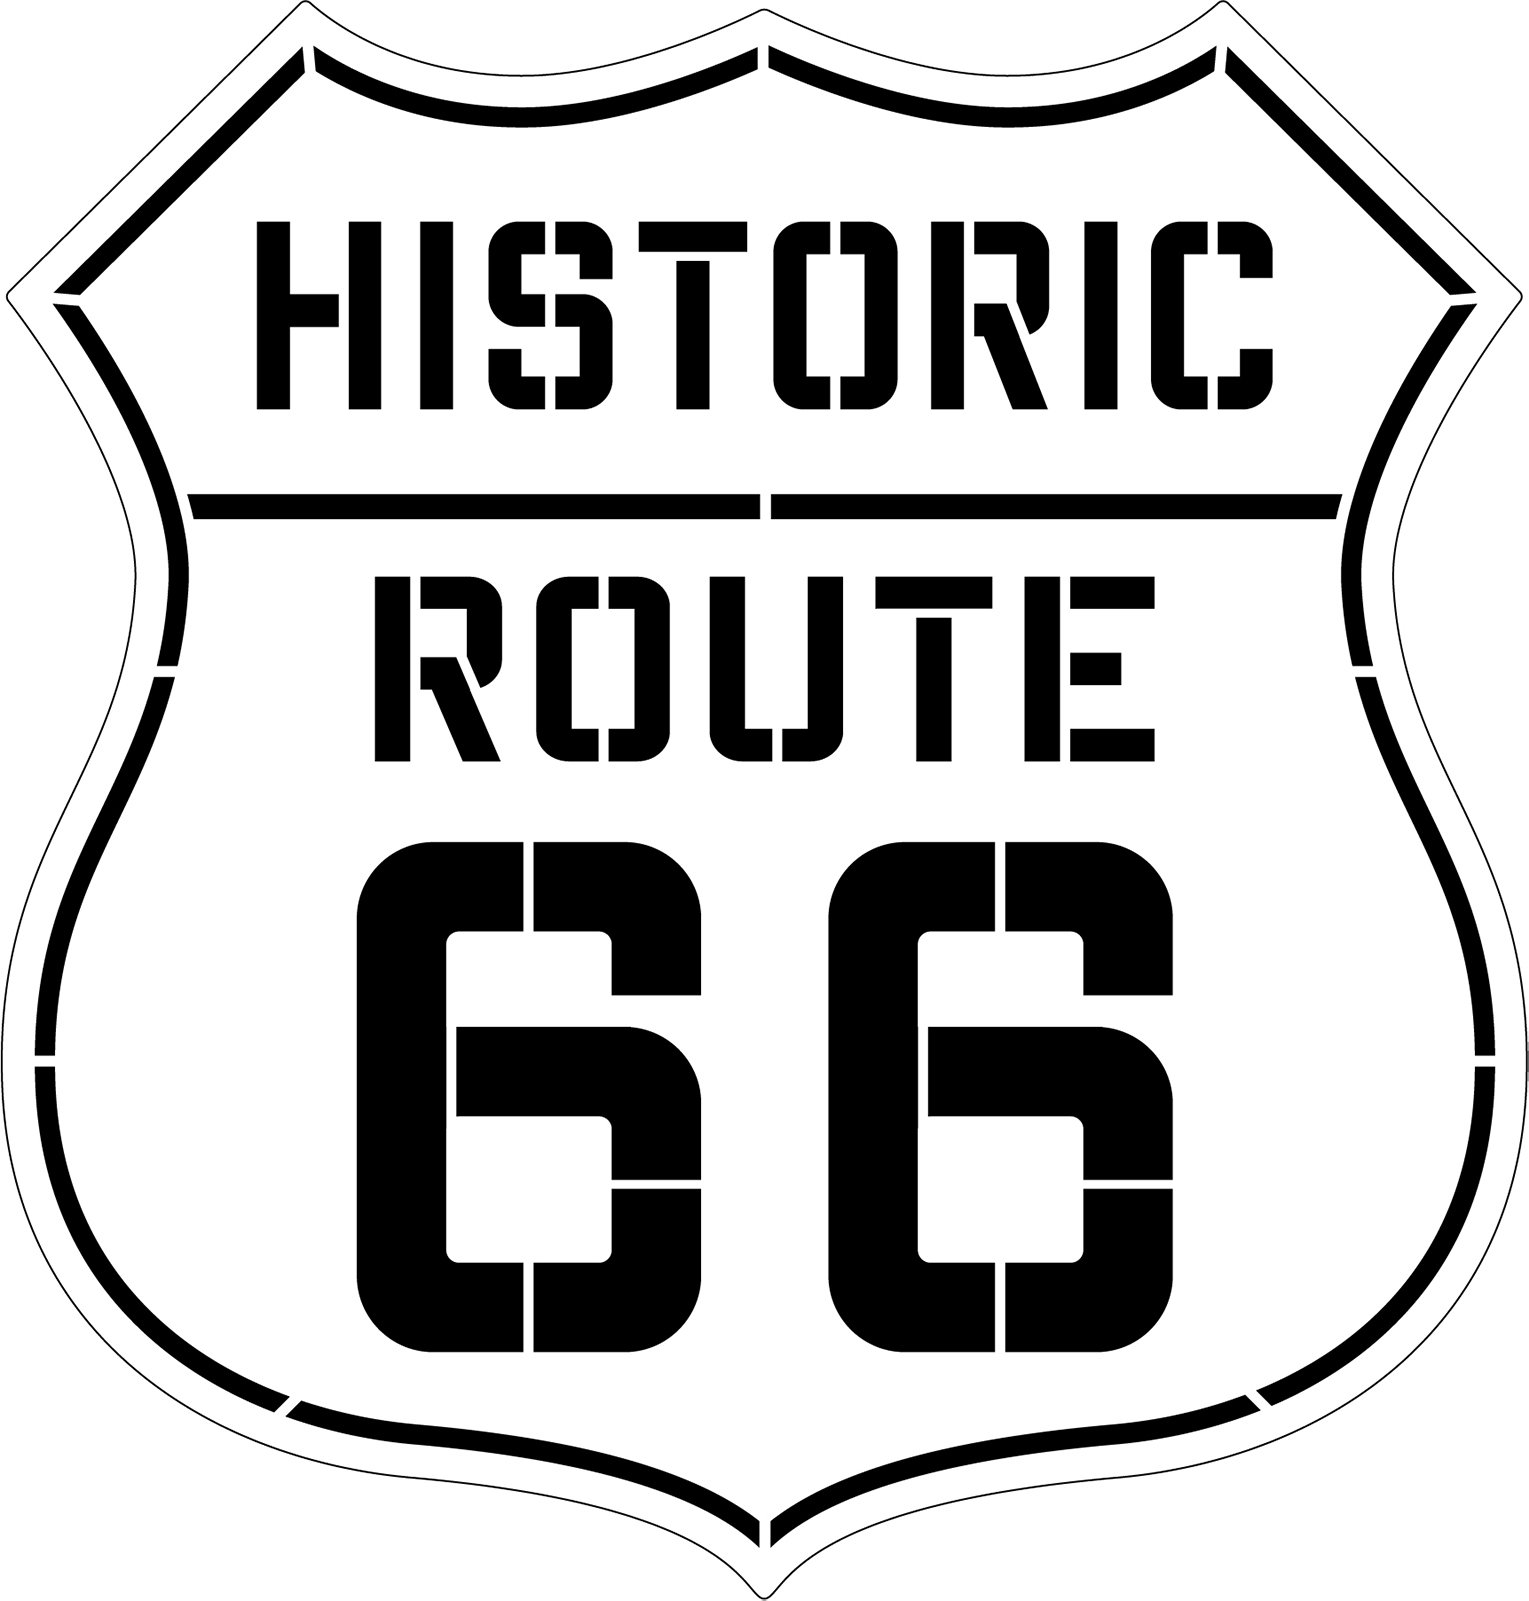 Historic Route 66 Sign Stencil by StudioR12 - Select Size - USA Made - Craft & Paint DIY Vintage Game Room Garage Wood Sign for Home Decor